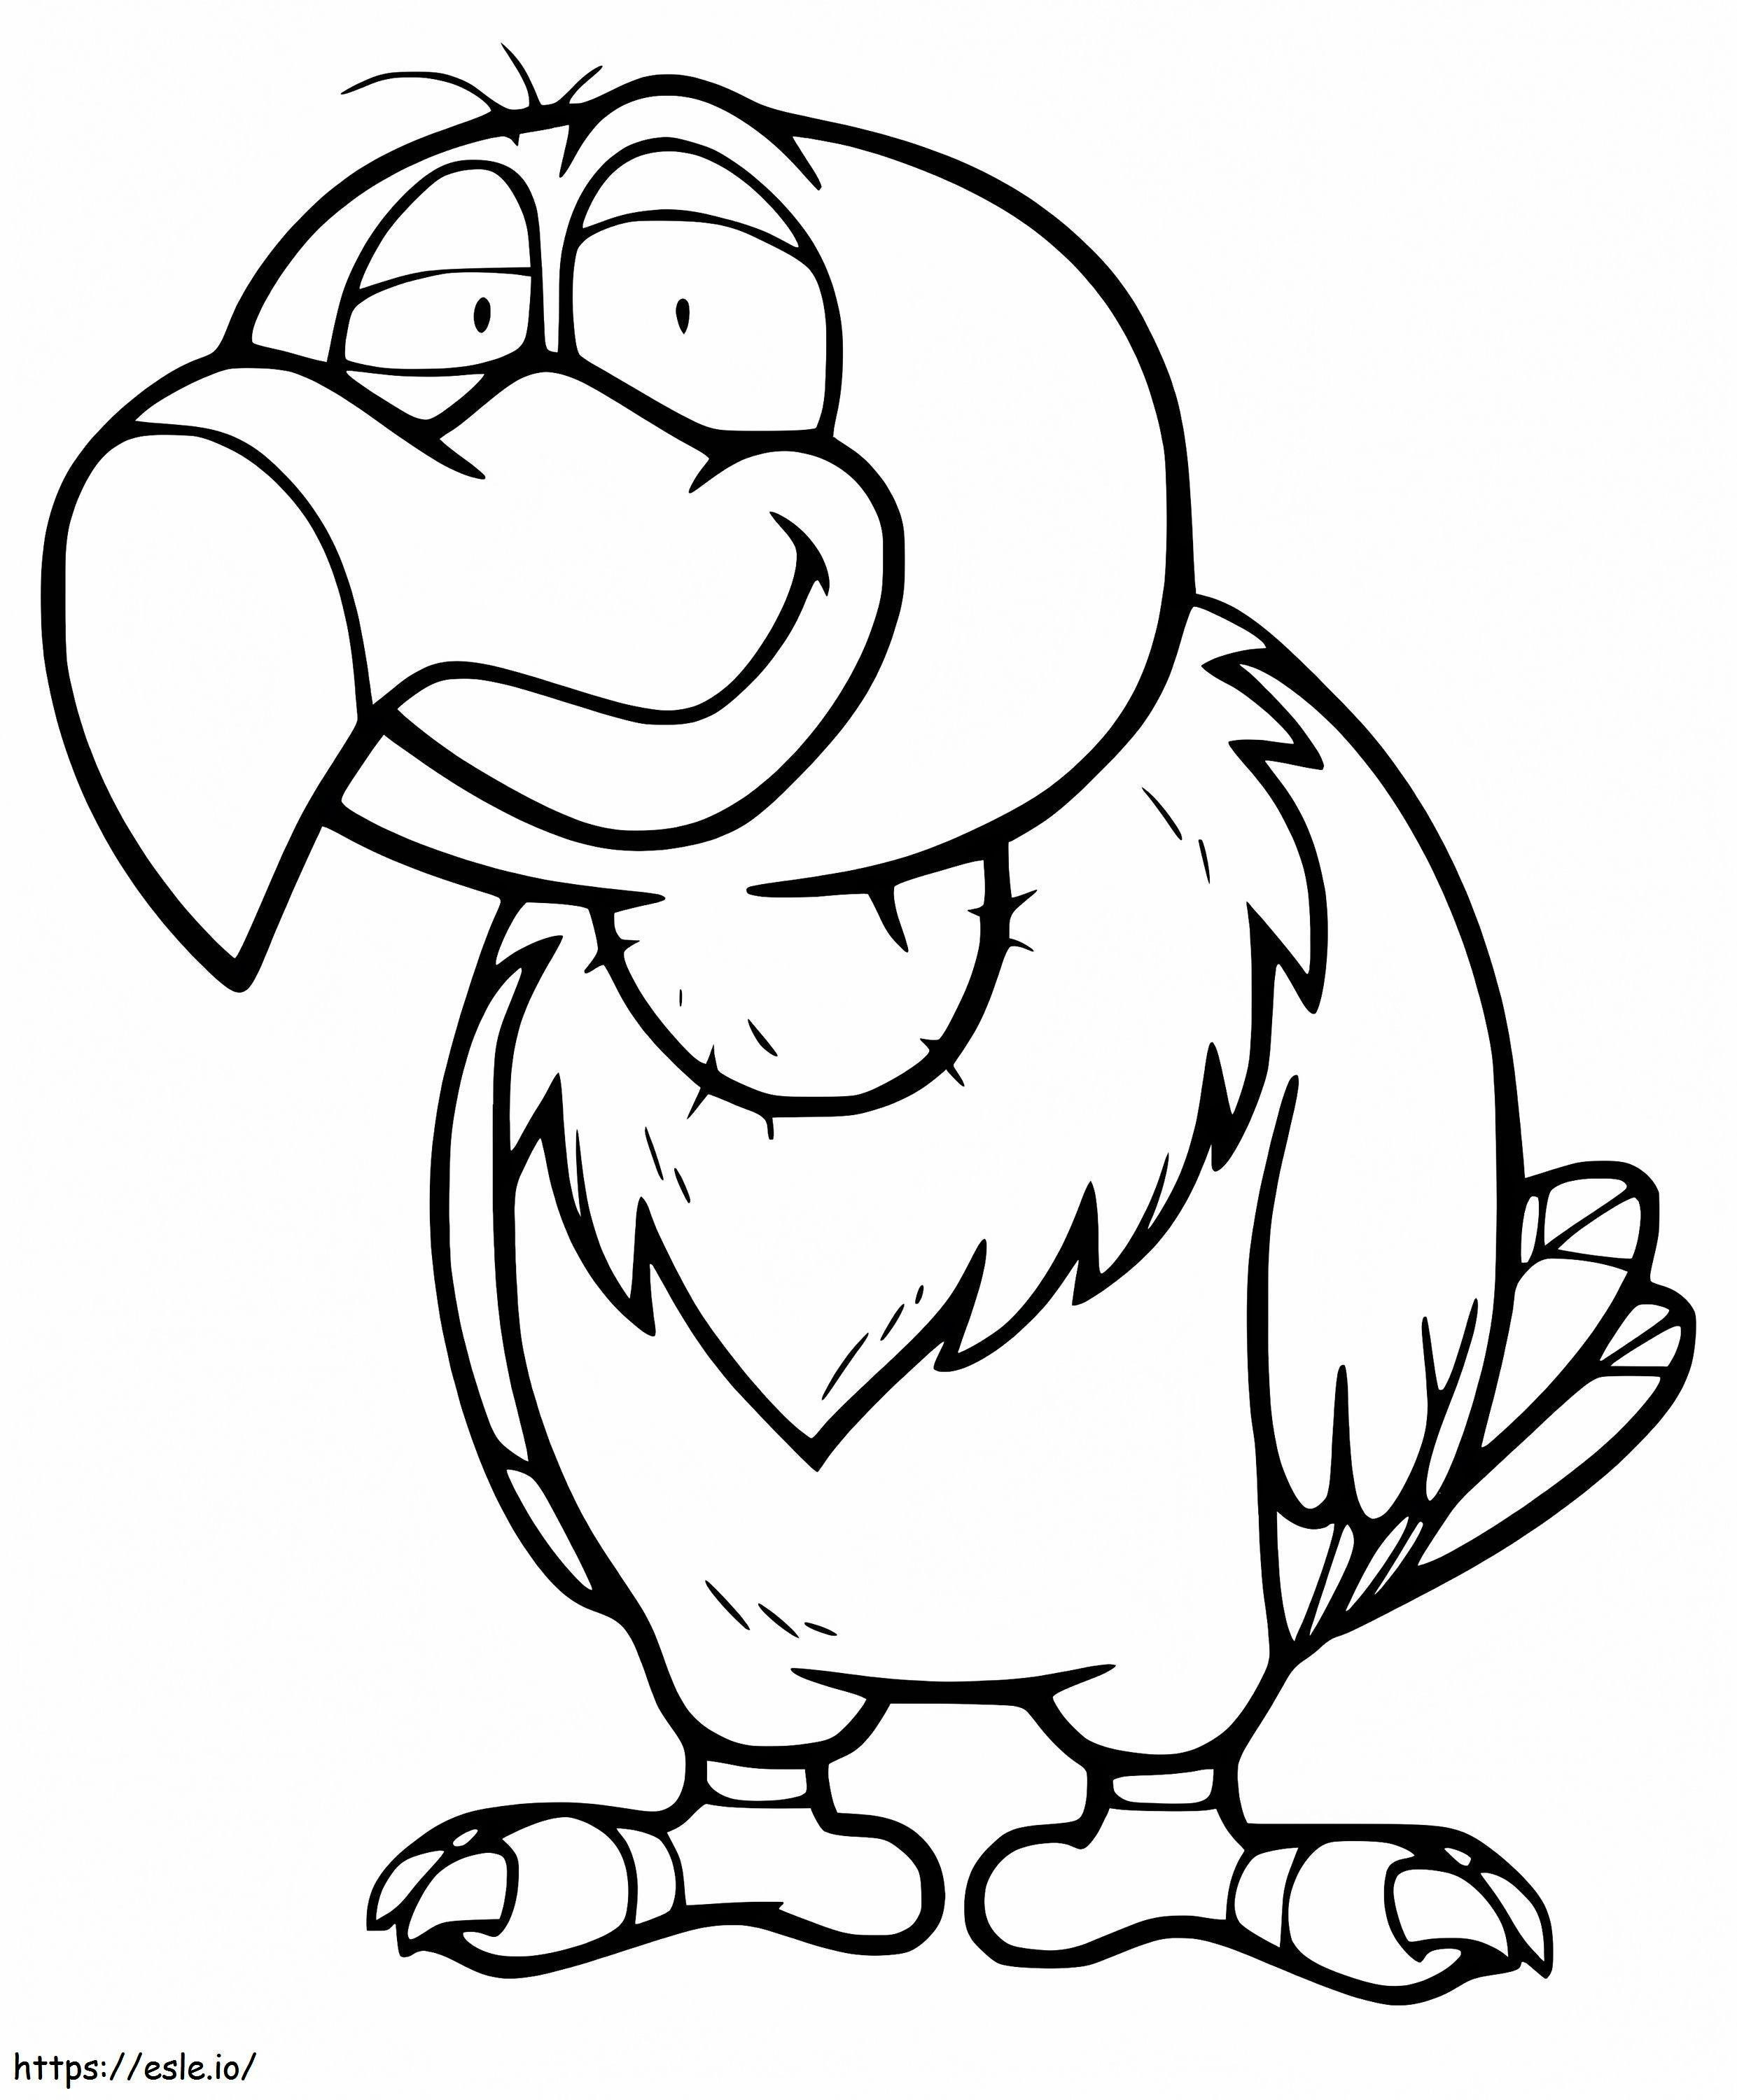 Animated Vulture coloring page